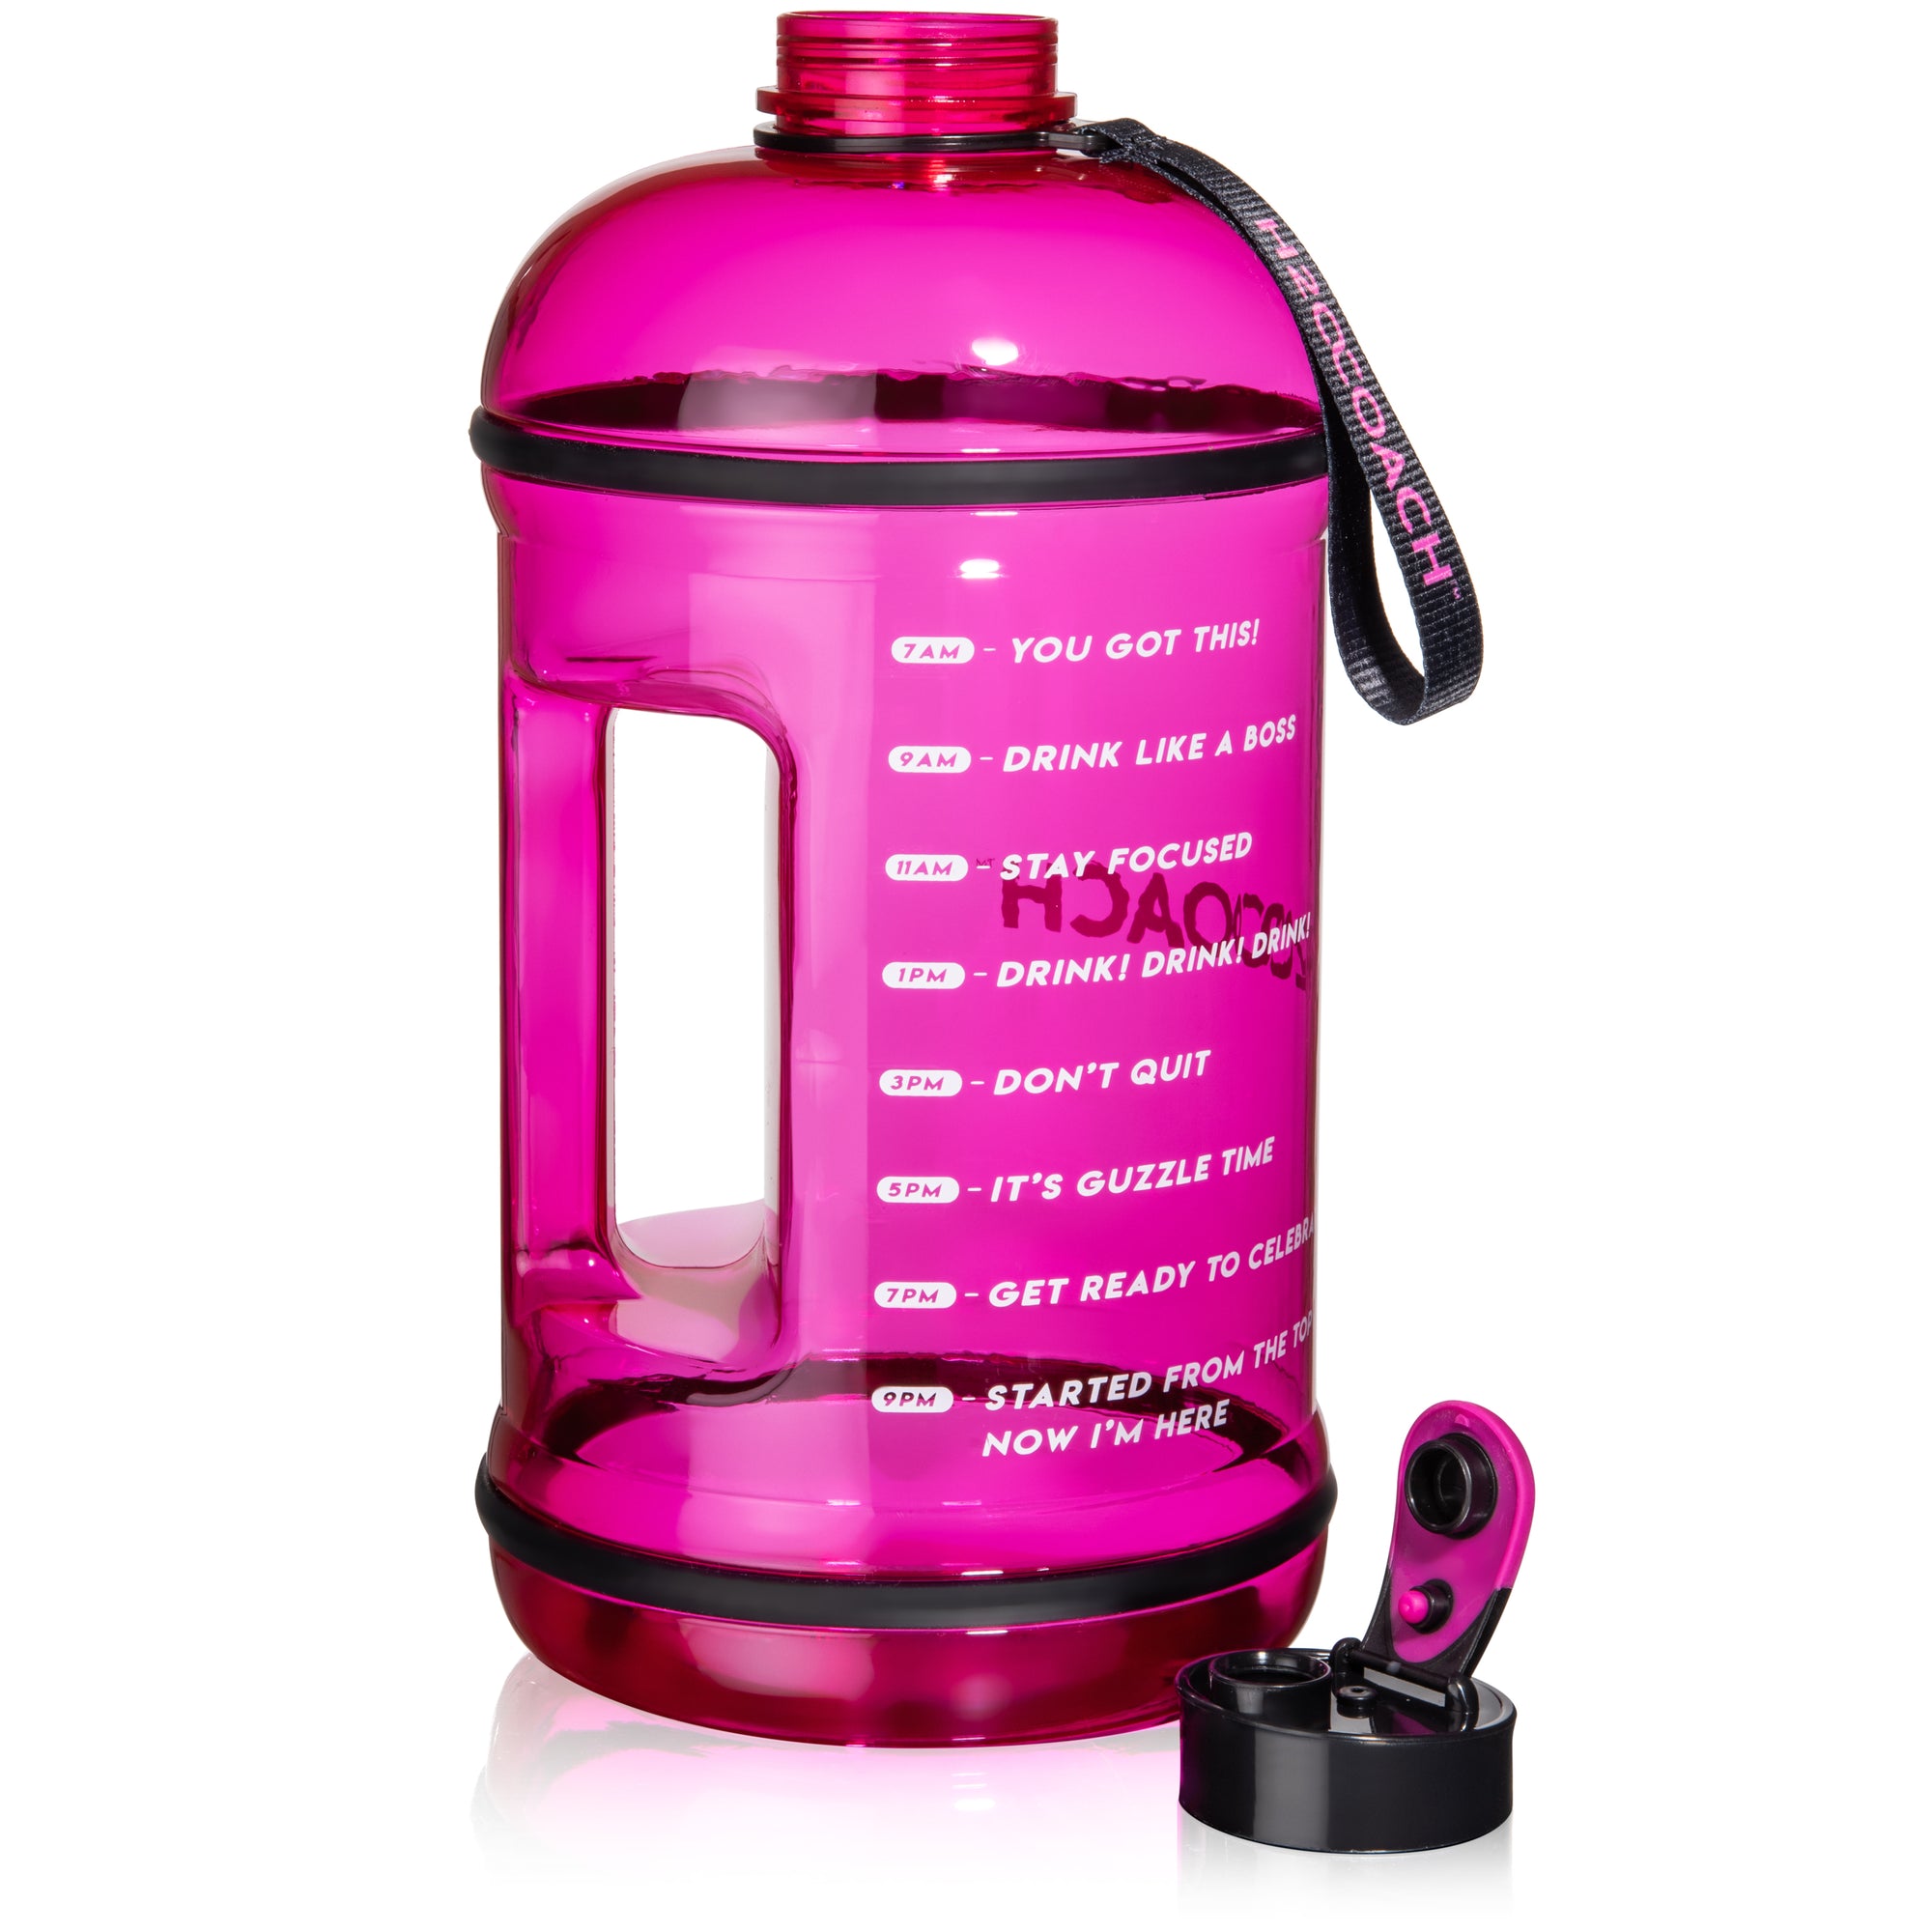 Pink Gallon Water Bottle Hour Time Marker Straw and Handle 128oz 1 Gallon  Water